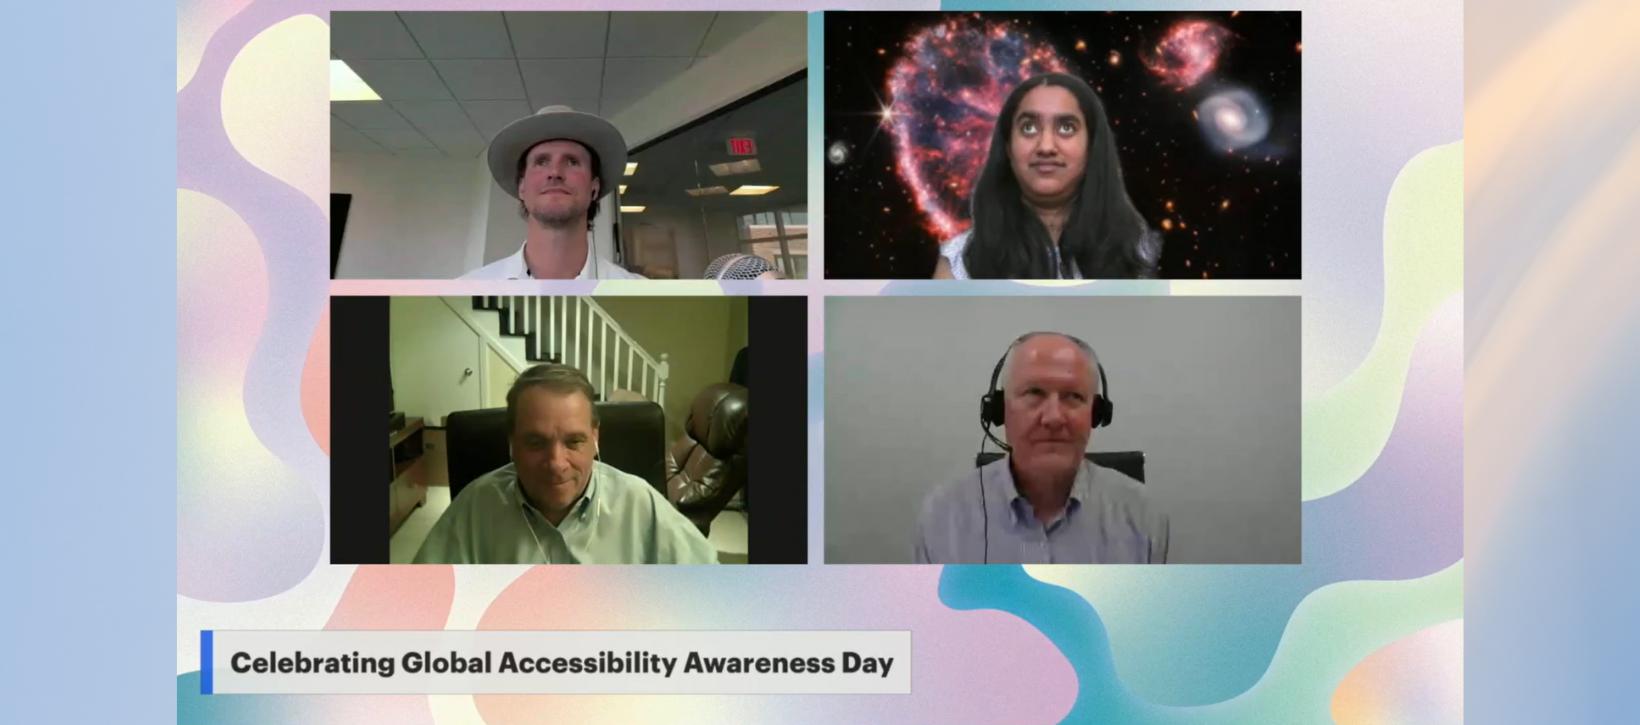 A screenshot of the GAAD event the American Council of the Blind hosted with four panelists appearing in individual zoom screen boxes. The panelists were, in order of appearance on screen from top left to bottom right, Clark Rachfal, Director of Advocacy and Governmental Affairs for the American Council of the Blind, Swatha Nandhakumar, Advocacy and Outreach Specialist for the American Council of the Blind, Carl Richardson, ADA Coordinator/504/Diversity Officer, Co-Chair of the Audio Description Project for the American Council of the Blind, and Dan Spoon, Interim Executive Director for the American Council of the Blind.